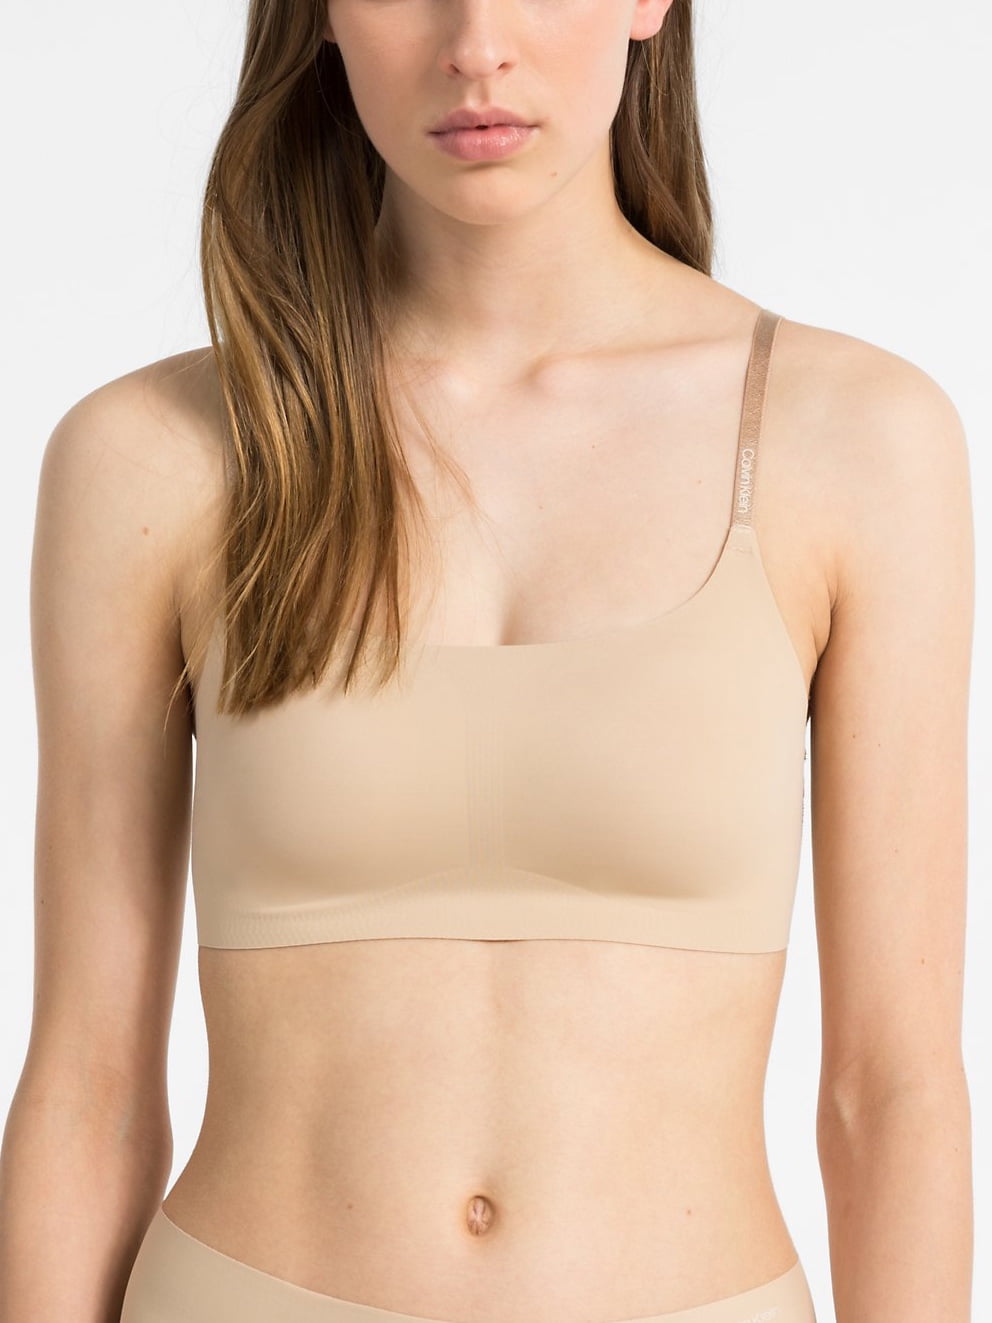 Calvin Klein Invisibles Lighly Lined Bralette, Bare, XSmall